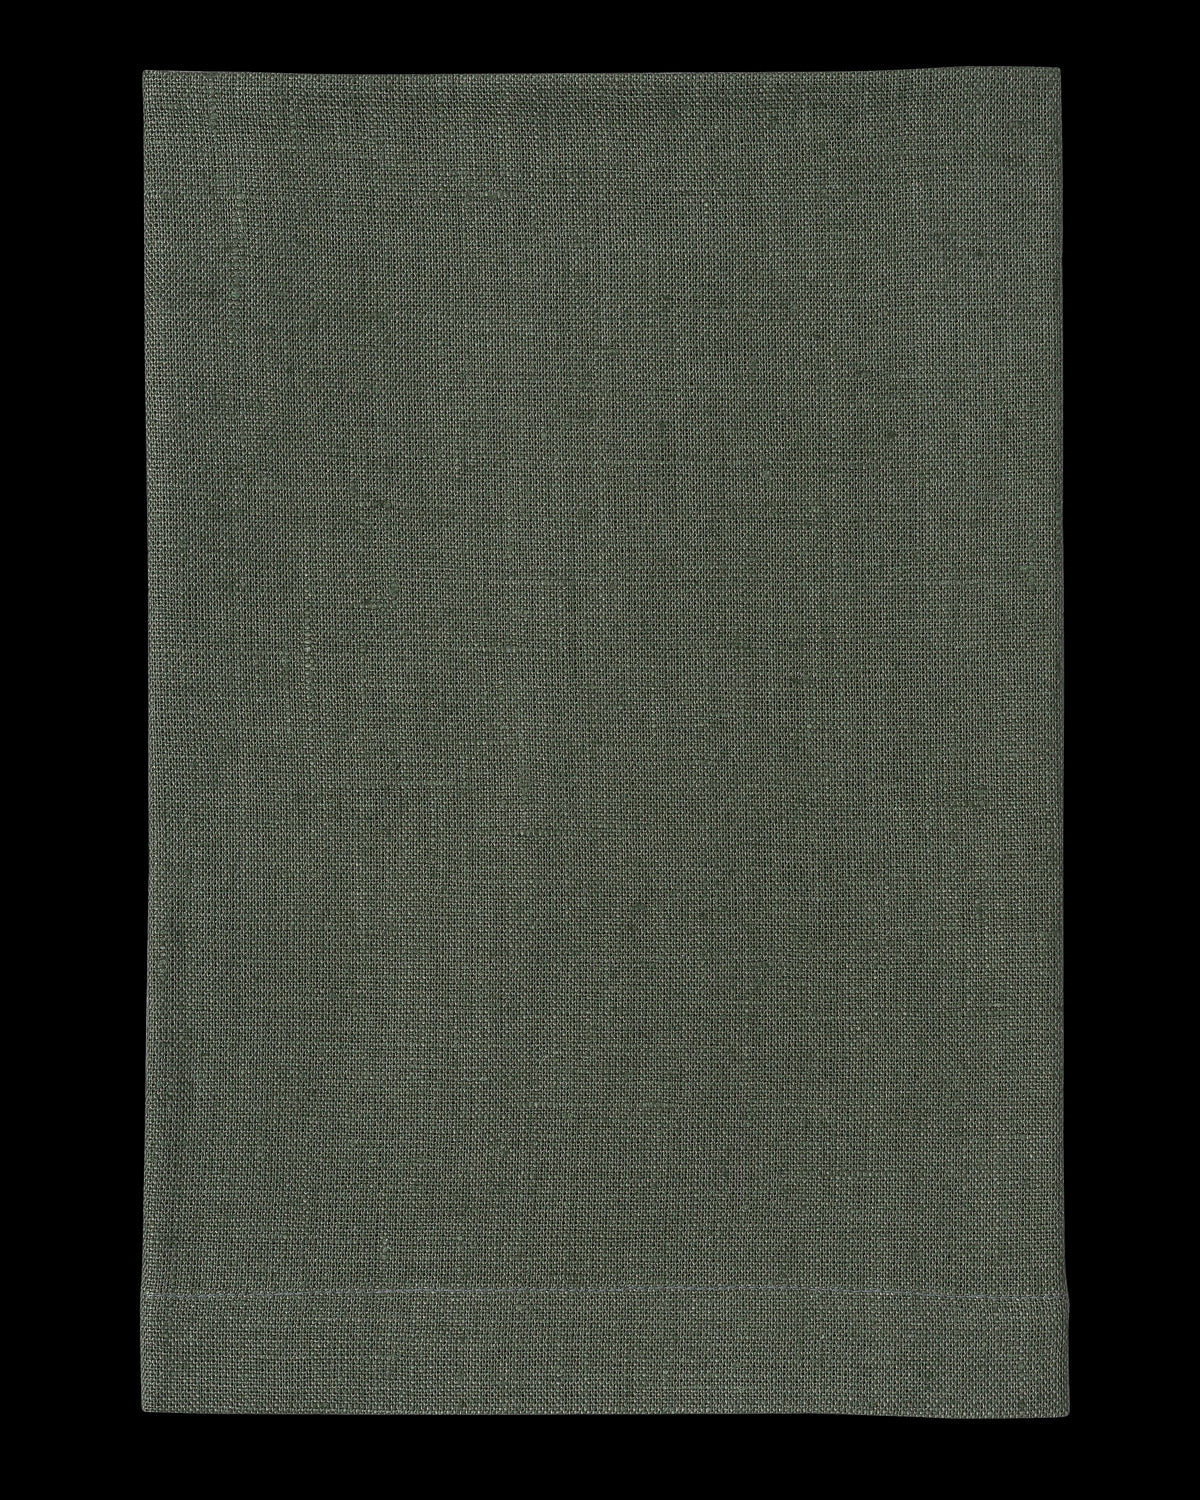 A linen placemat in the color pewter